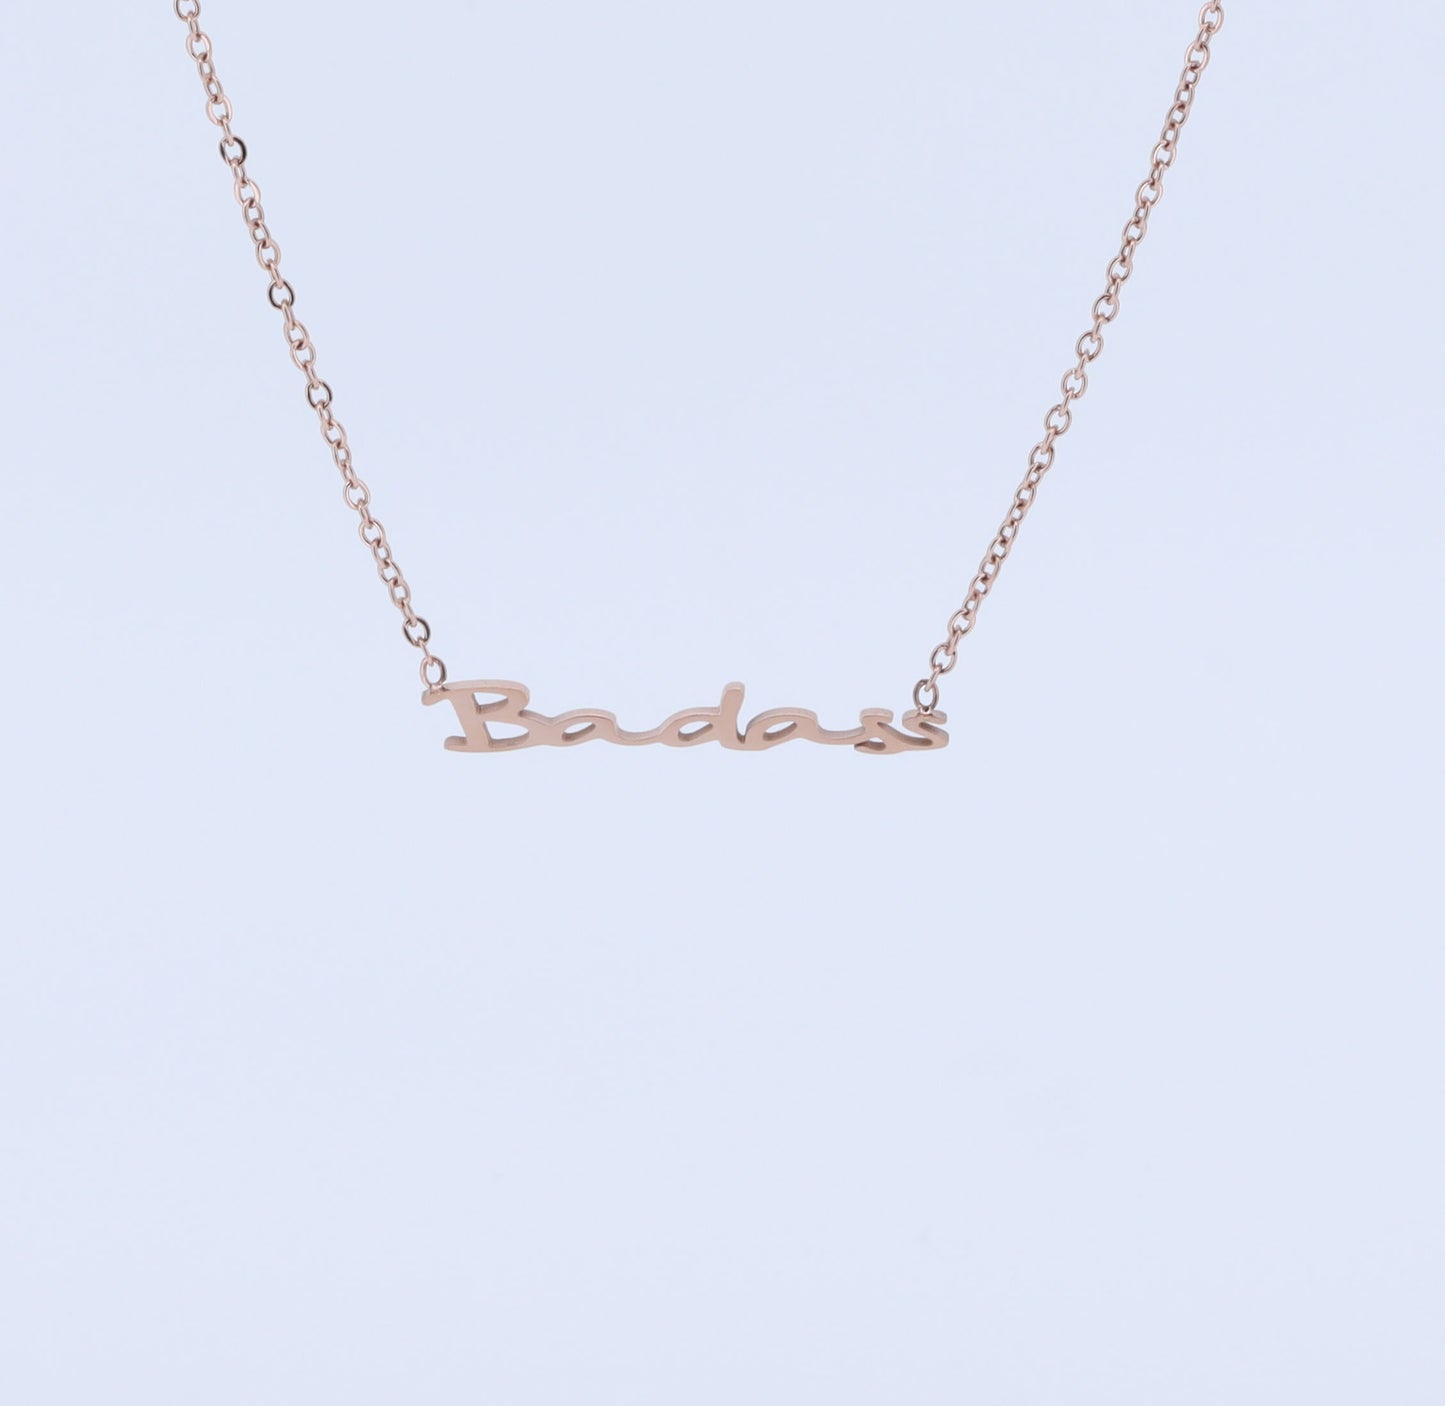 Badass Necklace - Anya Collection